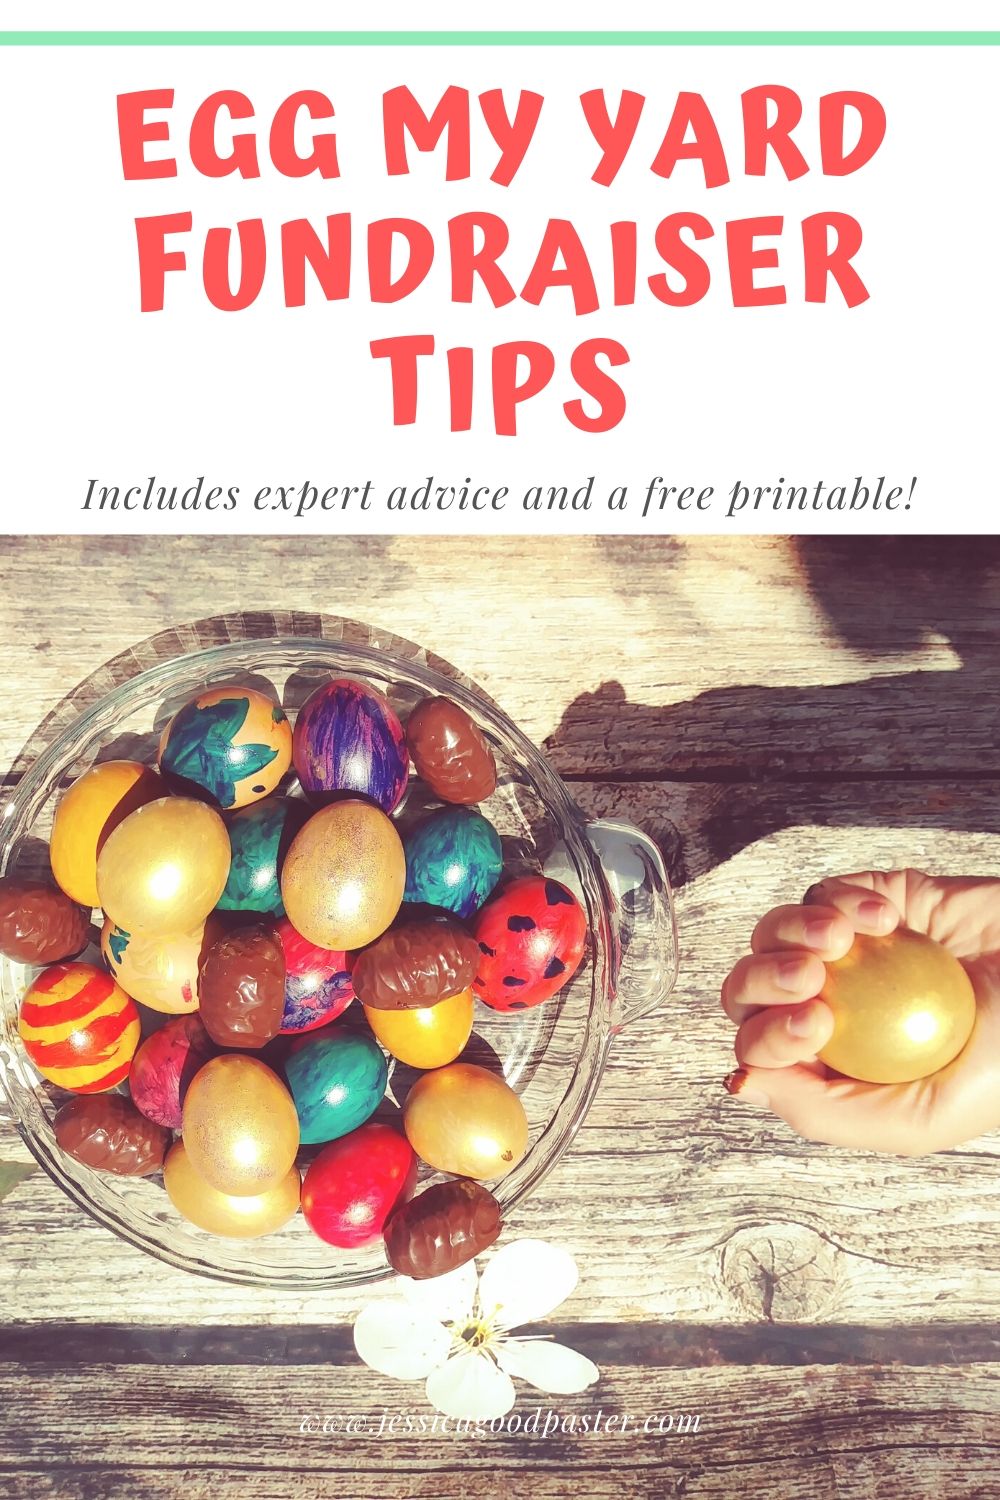 How to Run the Best Egg My Yard Adoption Fundraiser | Learn expert tips on how you can make money with this fun Easter fundraiser! Includes free printable Easter Bunny note and how to organize and advertise, flyer ideas, and ways to make your Egg Your Yard fundraiser a success! #fundraiser #adoption #adoptionfundraiser #easter